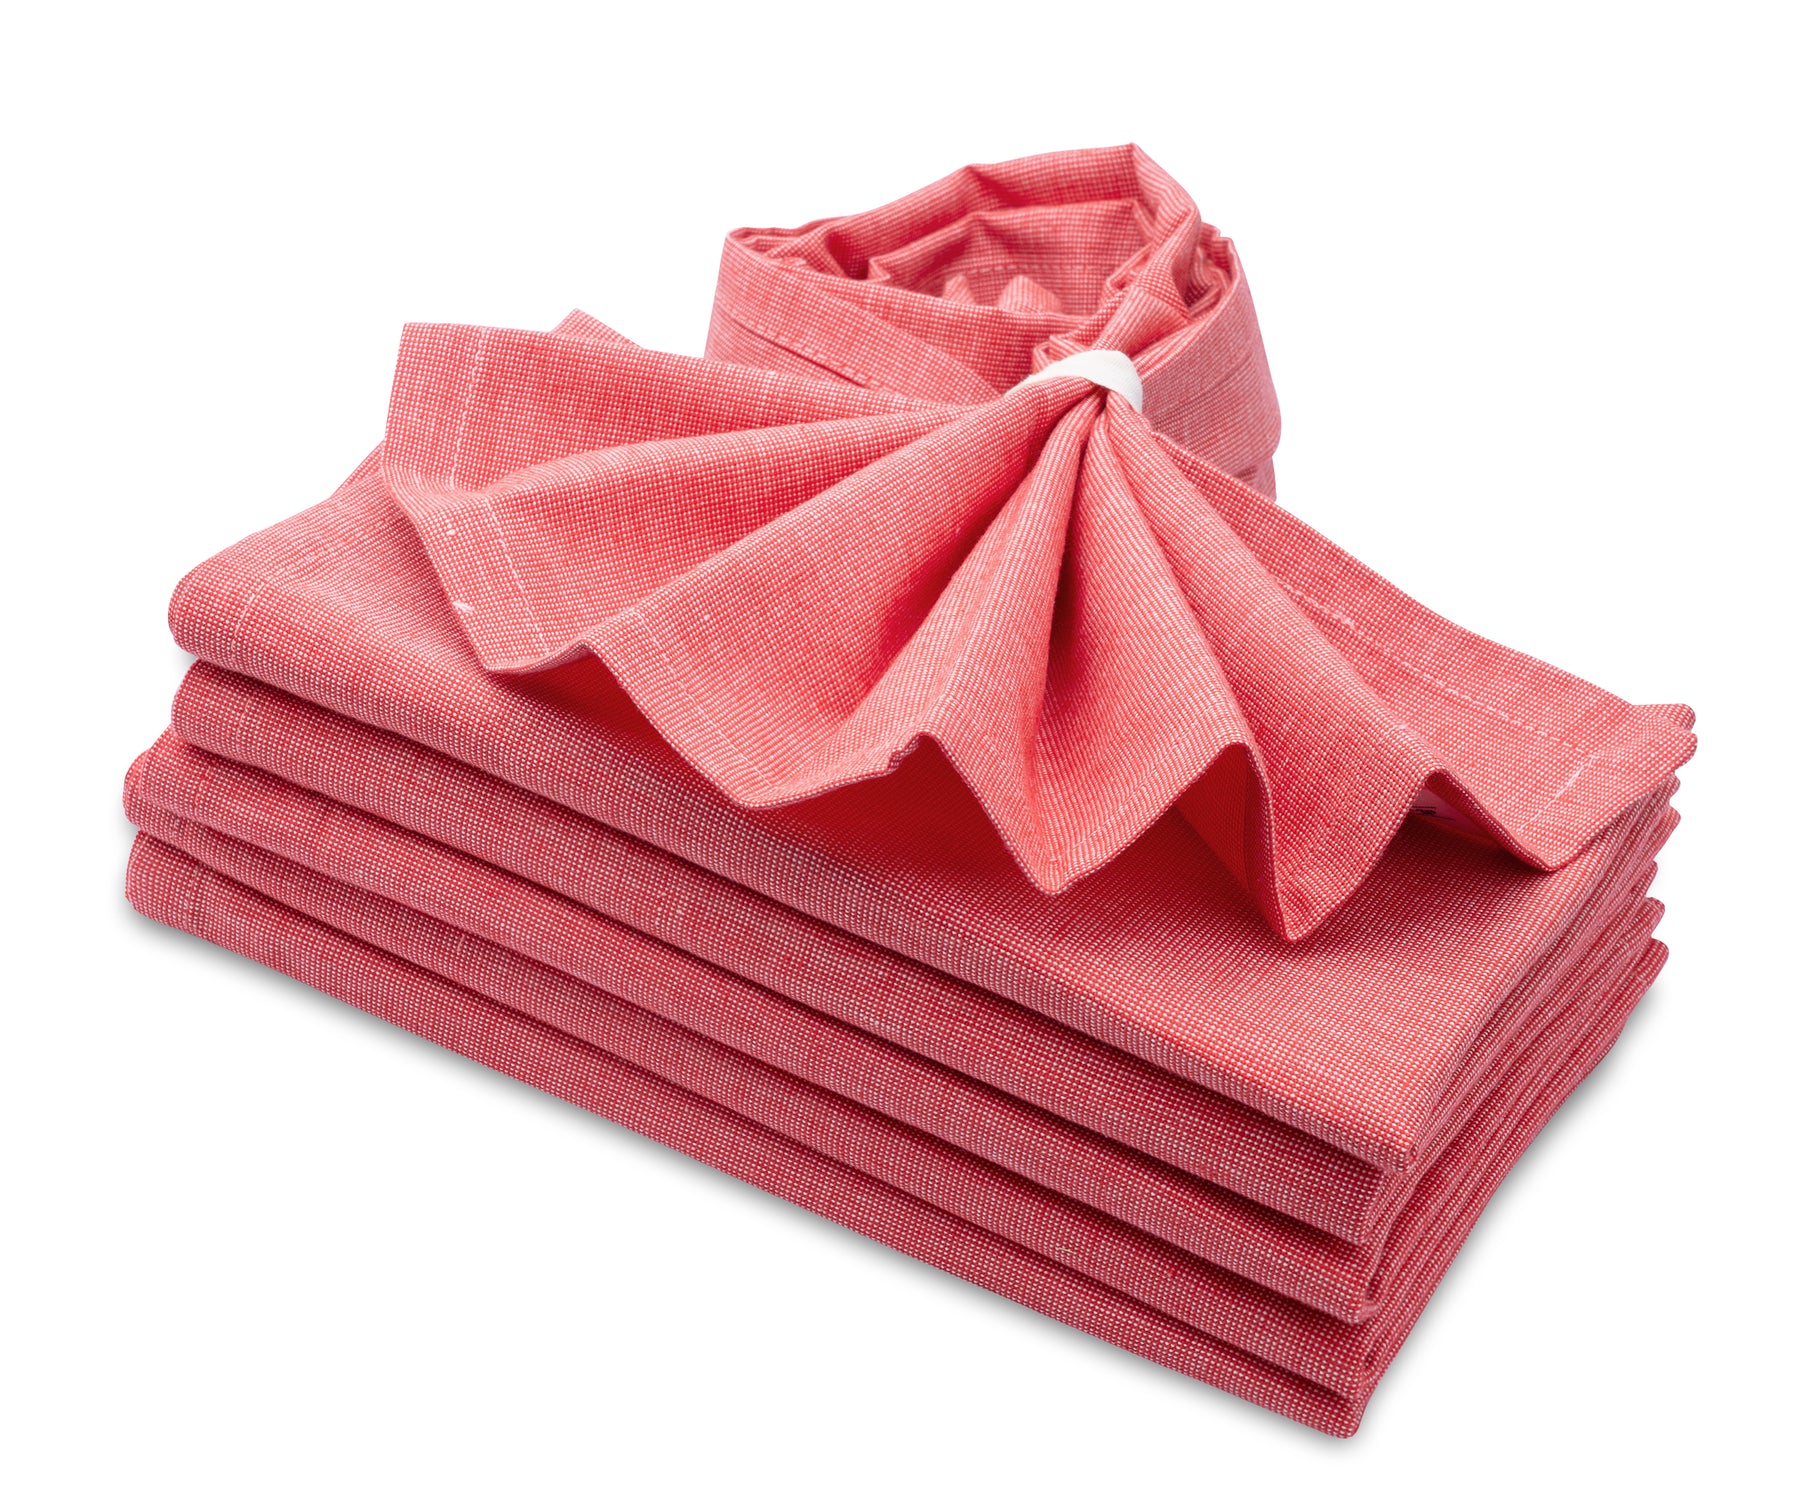 Pink Cloth Napkins - Soft and stylish, these pink napkins are a delightful addition to your dining experience.